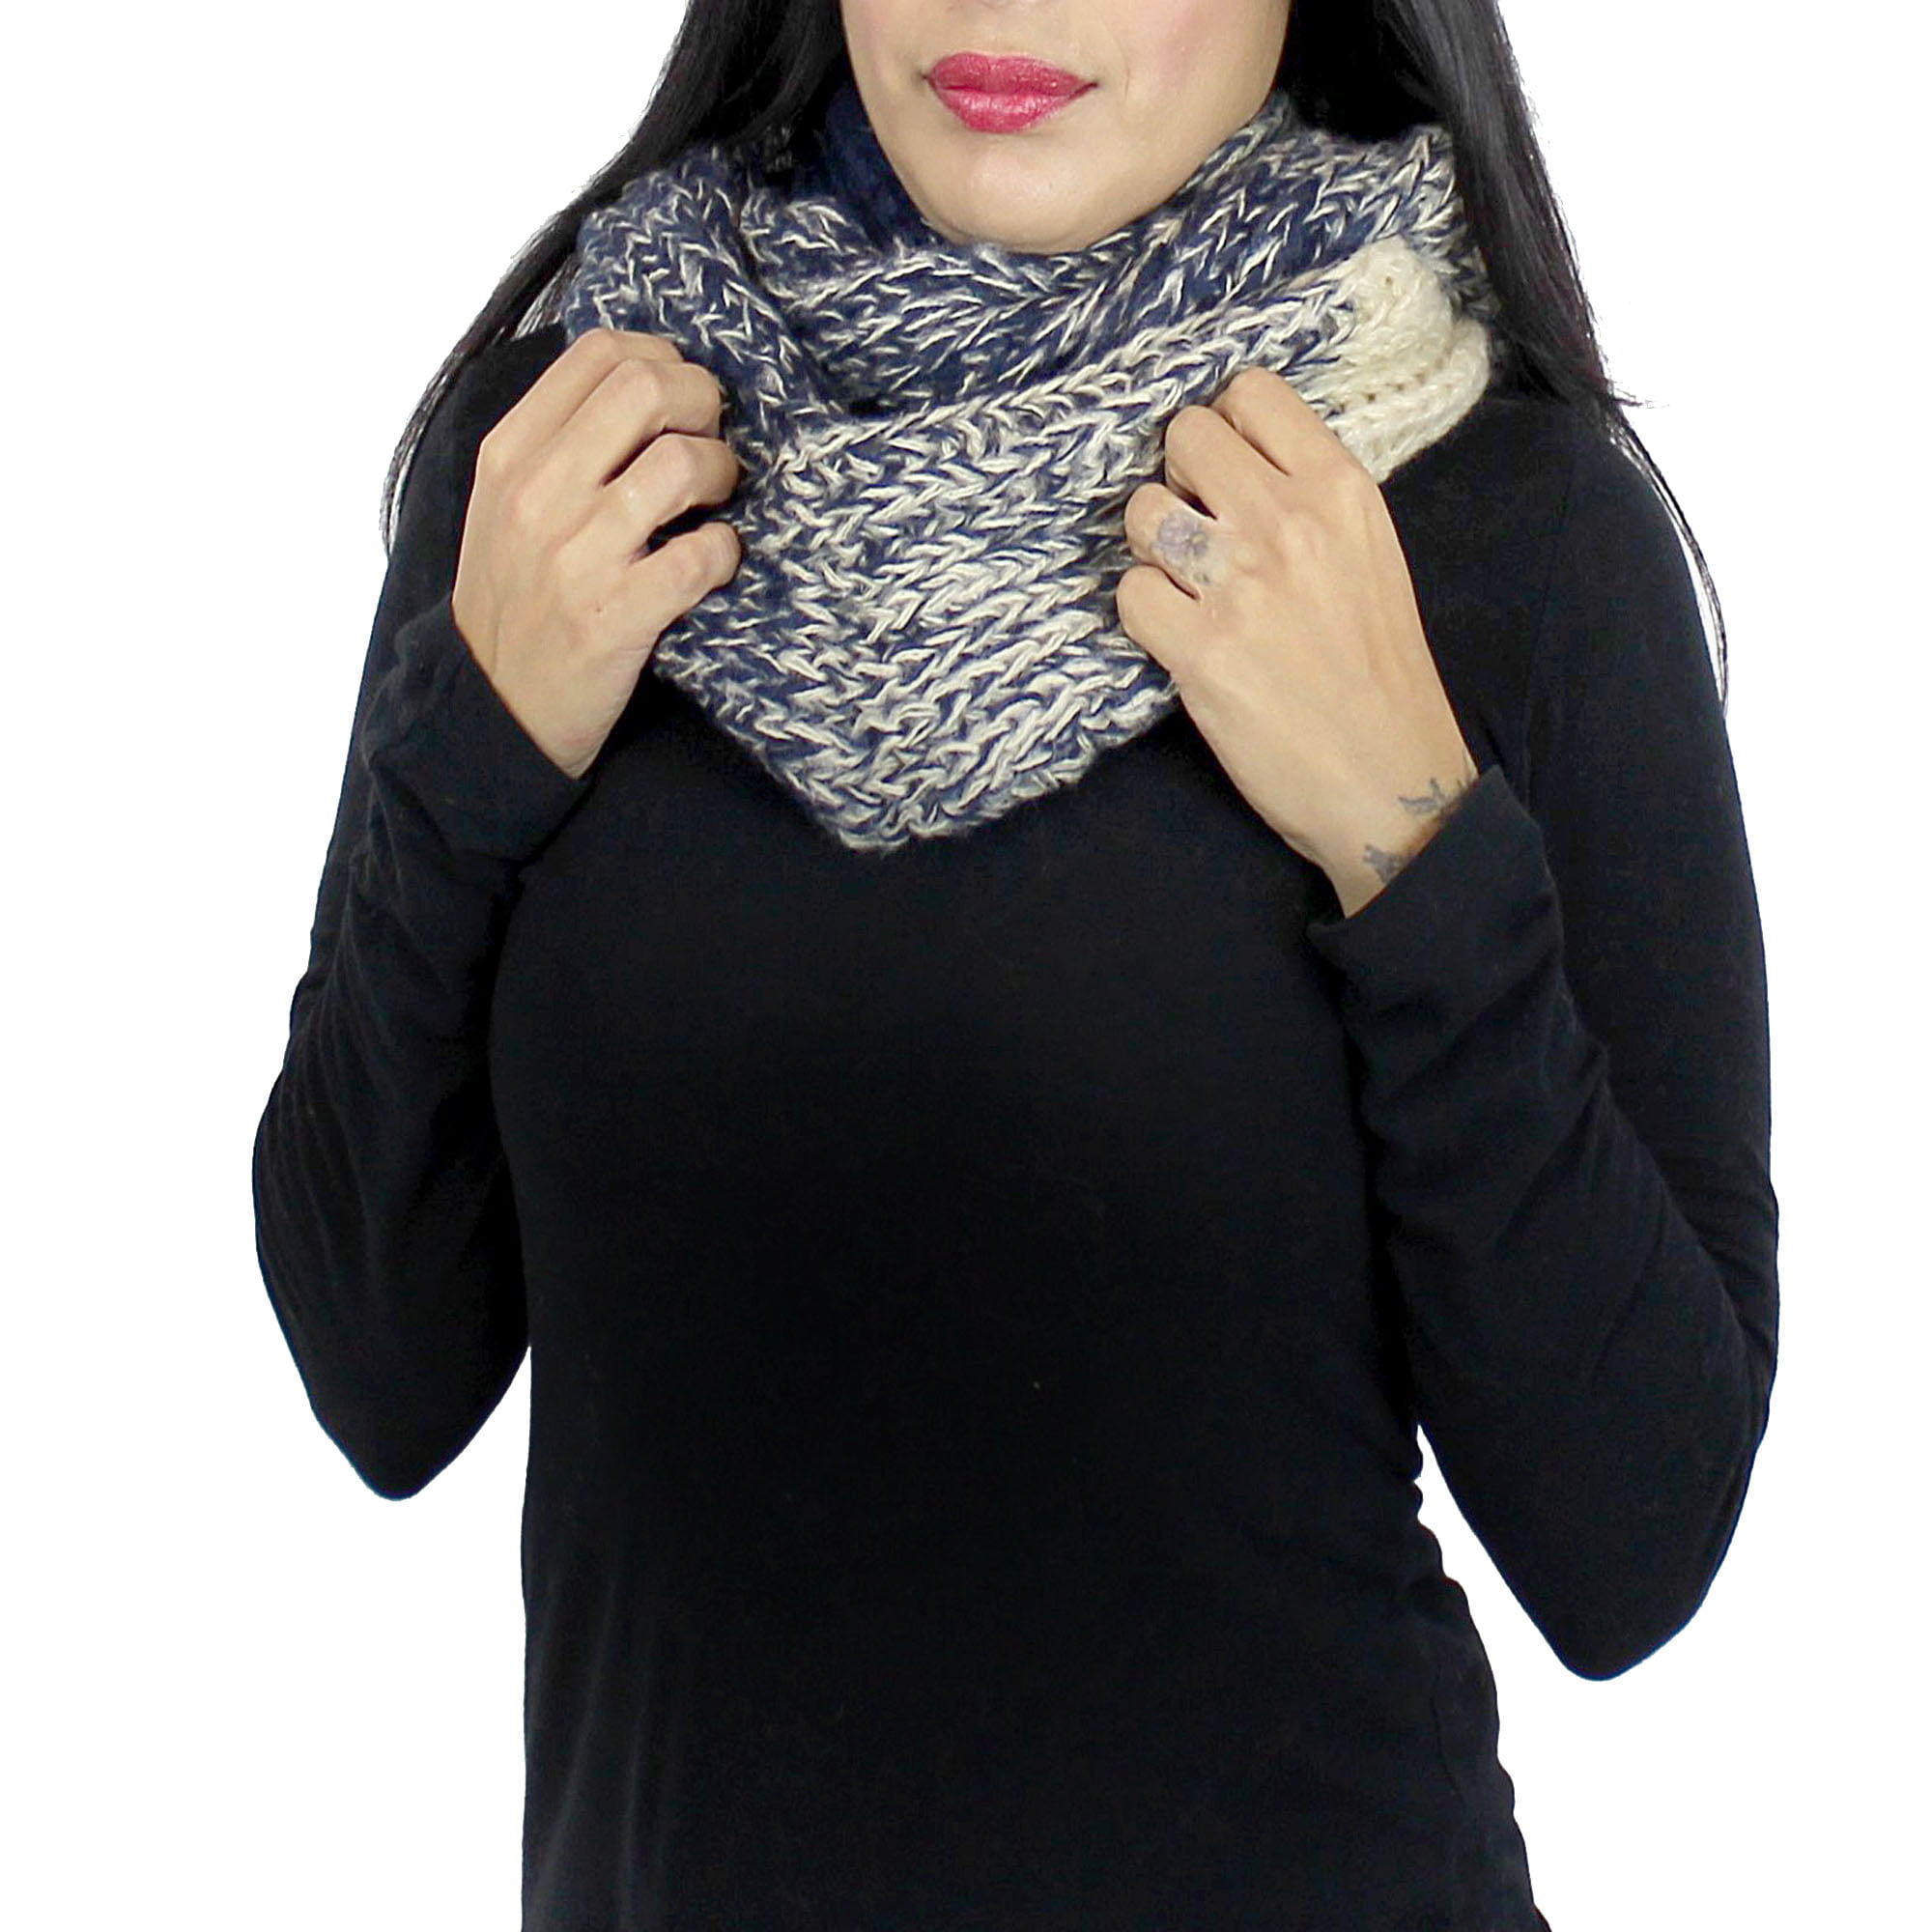 Chunky Soft Acrylic Knit Pointed Snood|Infinity Scarf 